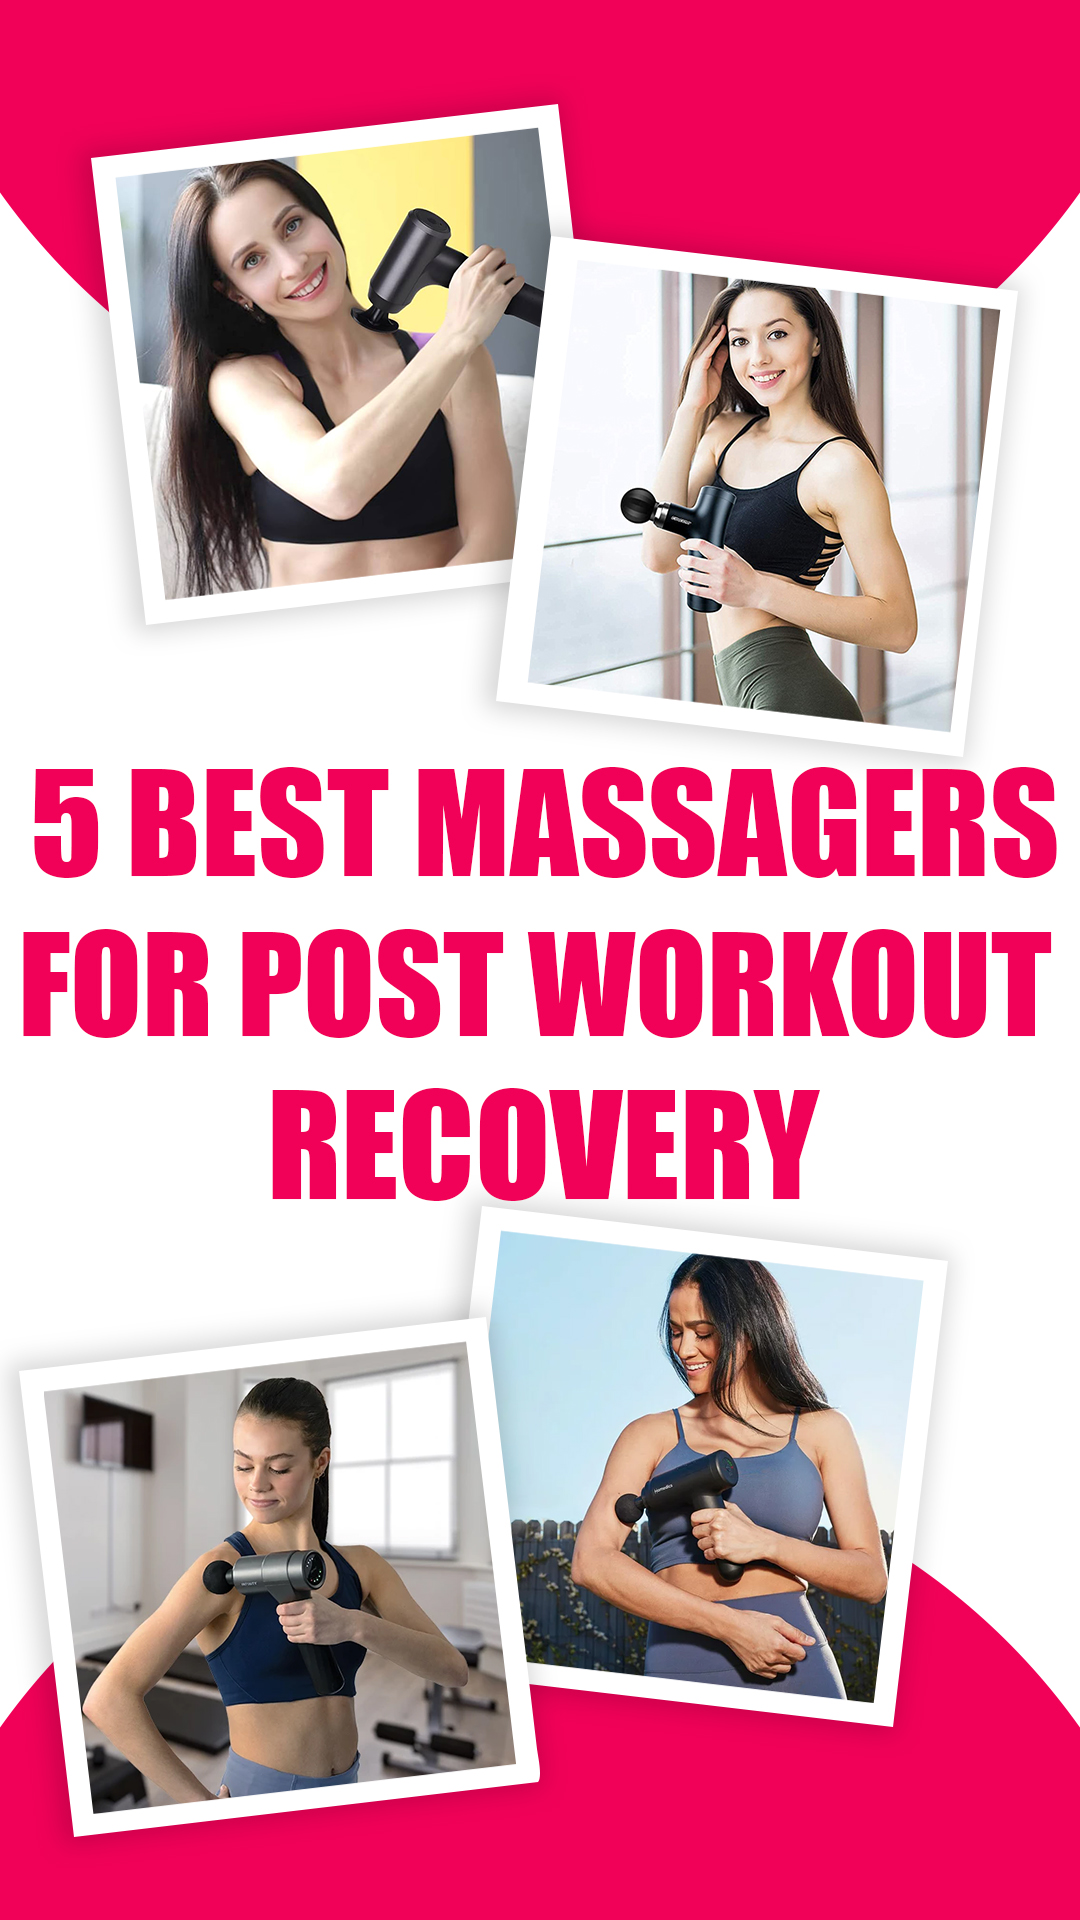 5 Best Massagers for Post-Workout Recovery